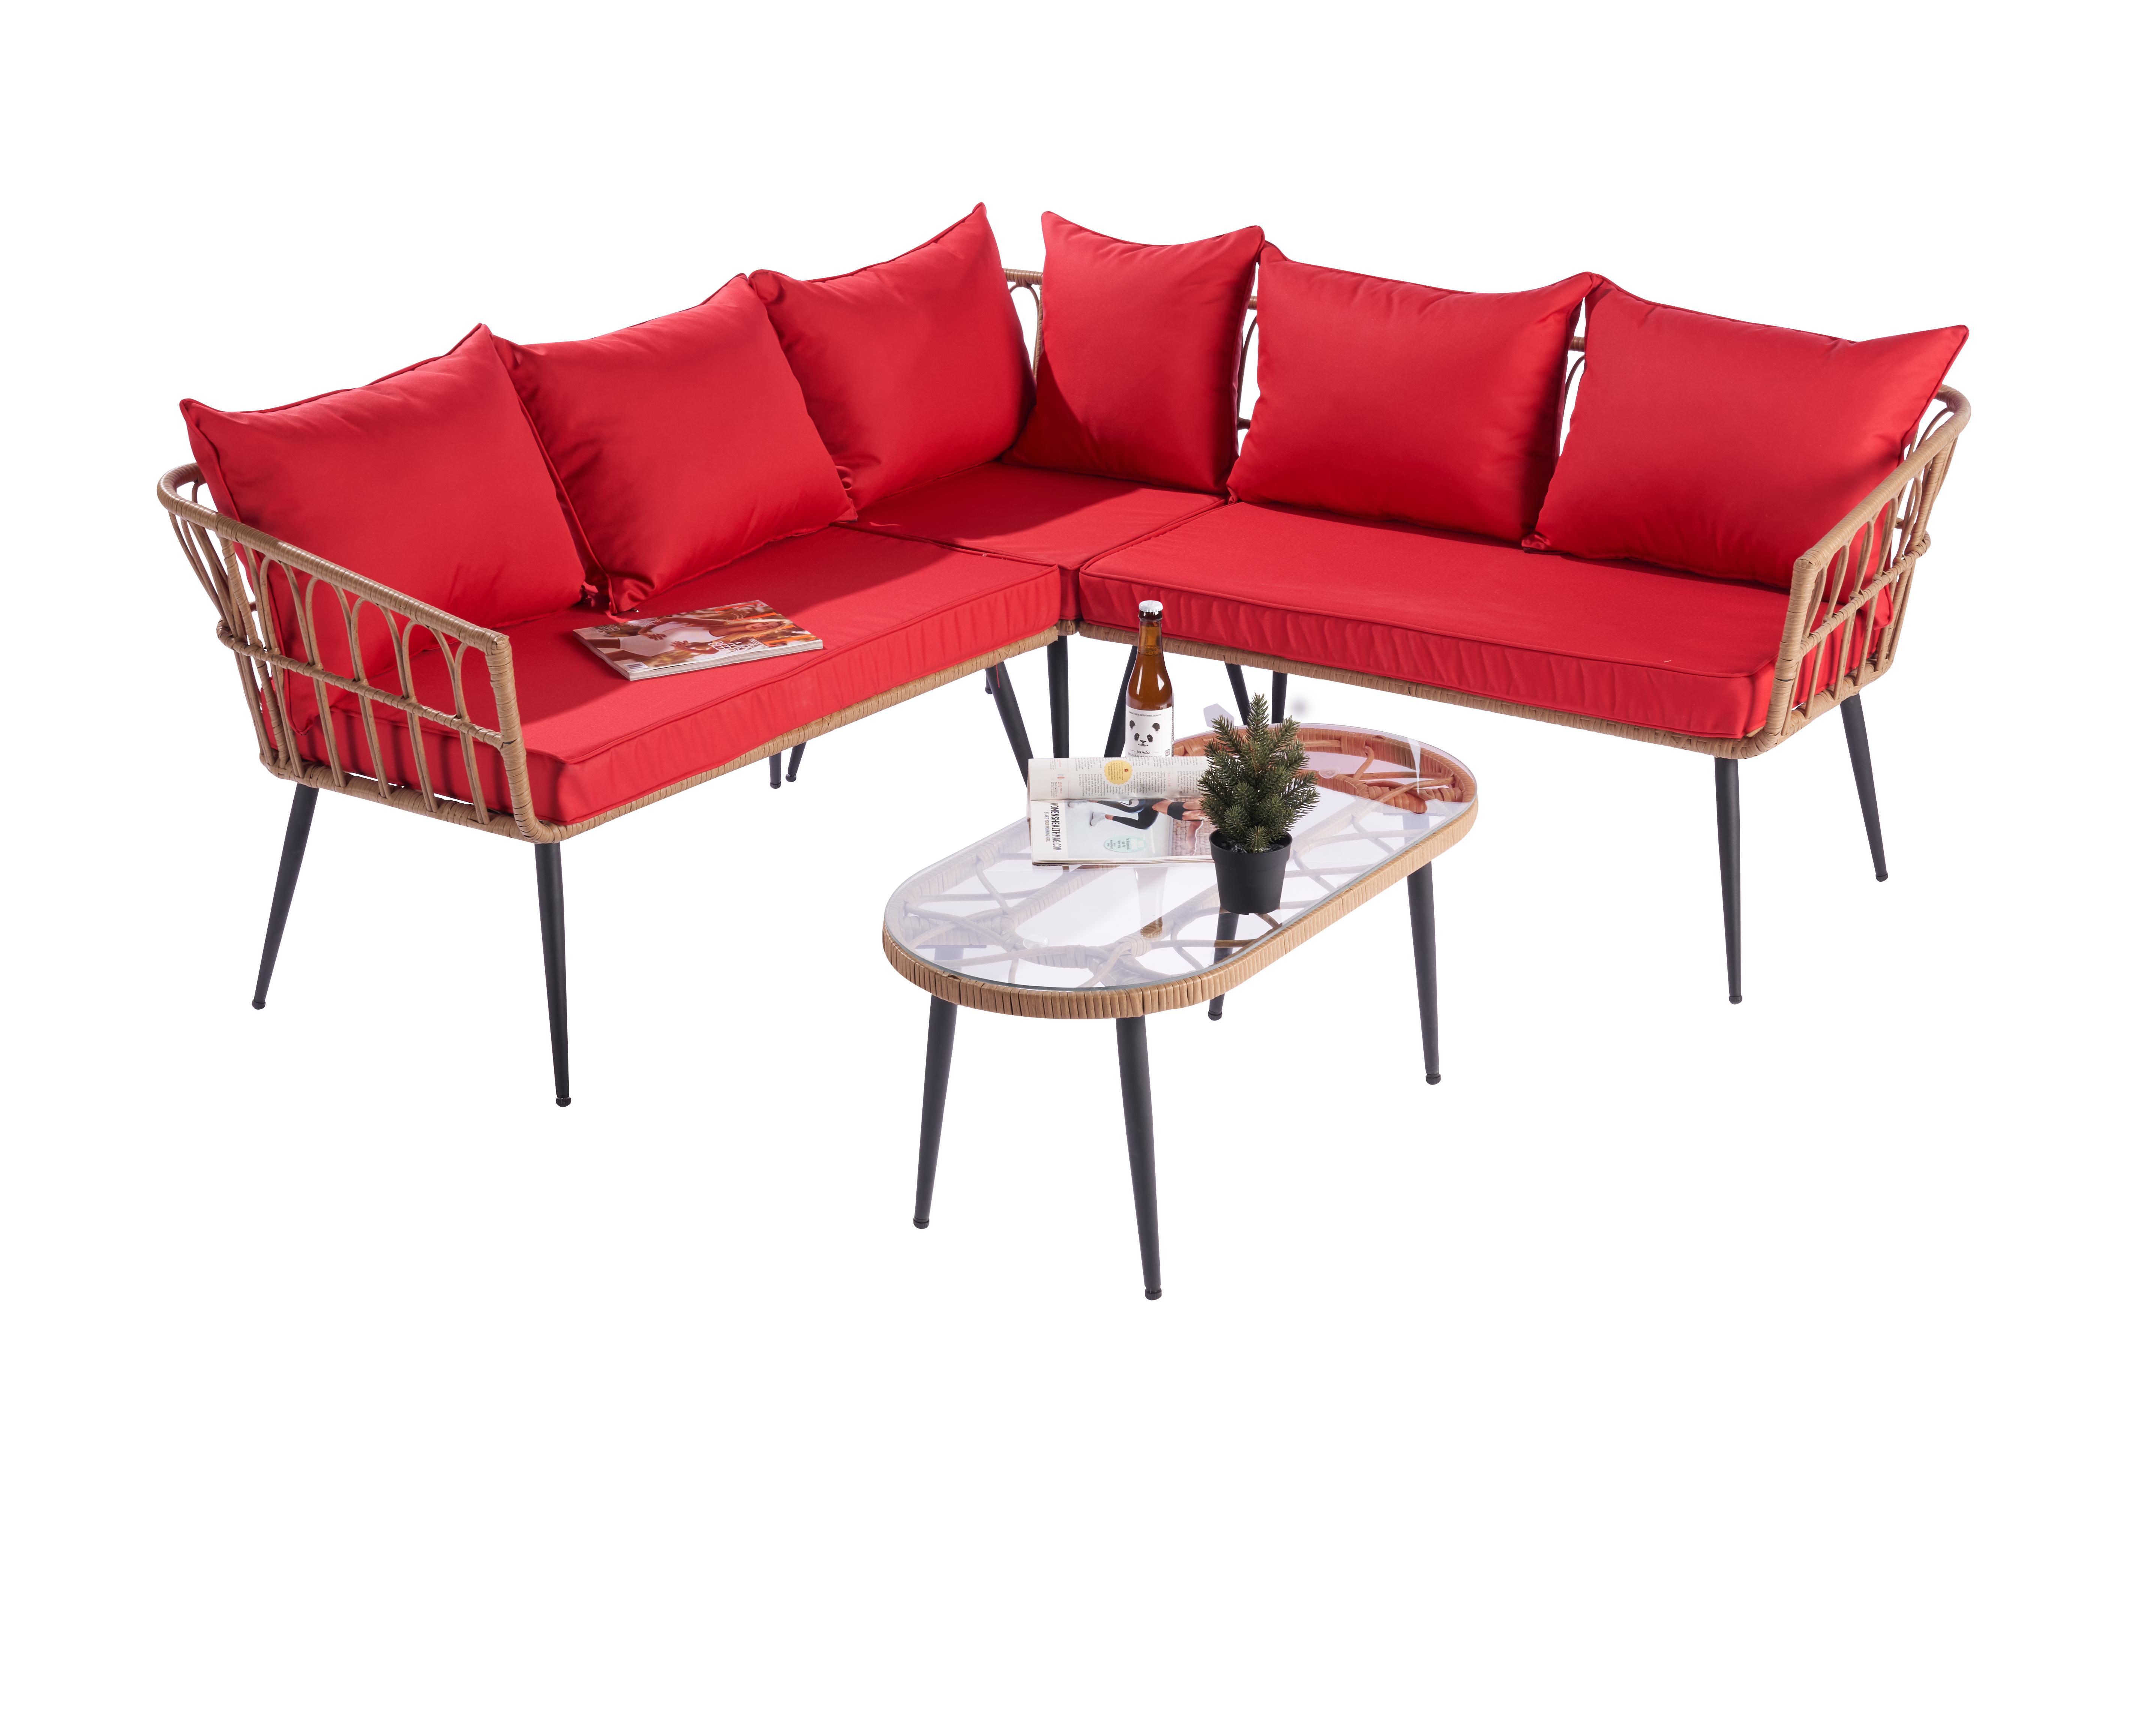 Wicker Patio Furniture Sets on for Backyard, 2023 Upgrade New 4-Piece Wicker Conversation Set w/L-Seats Sofa, R-Seats Sofa, Tempered Glass Table, Padded Cushions, Red, S8326 - image 2 of 7